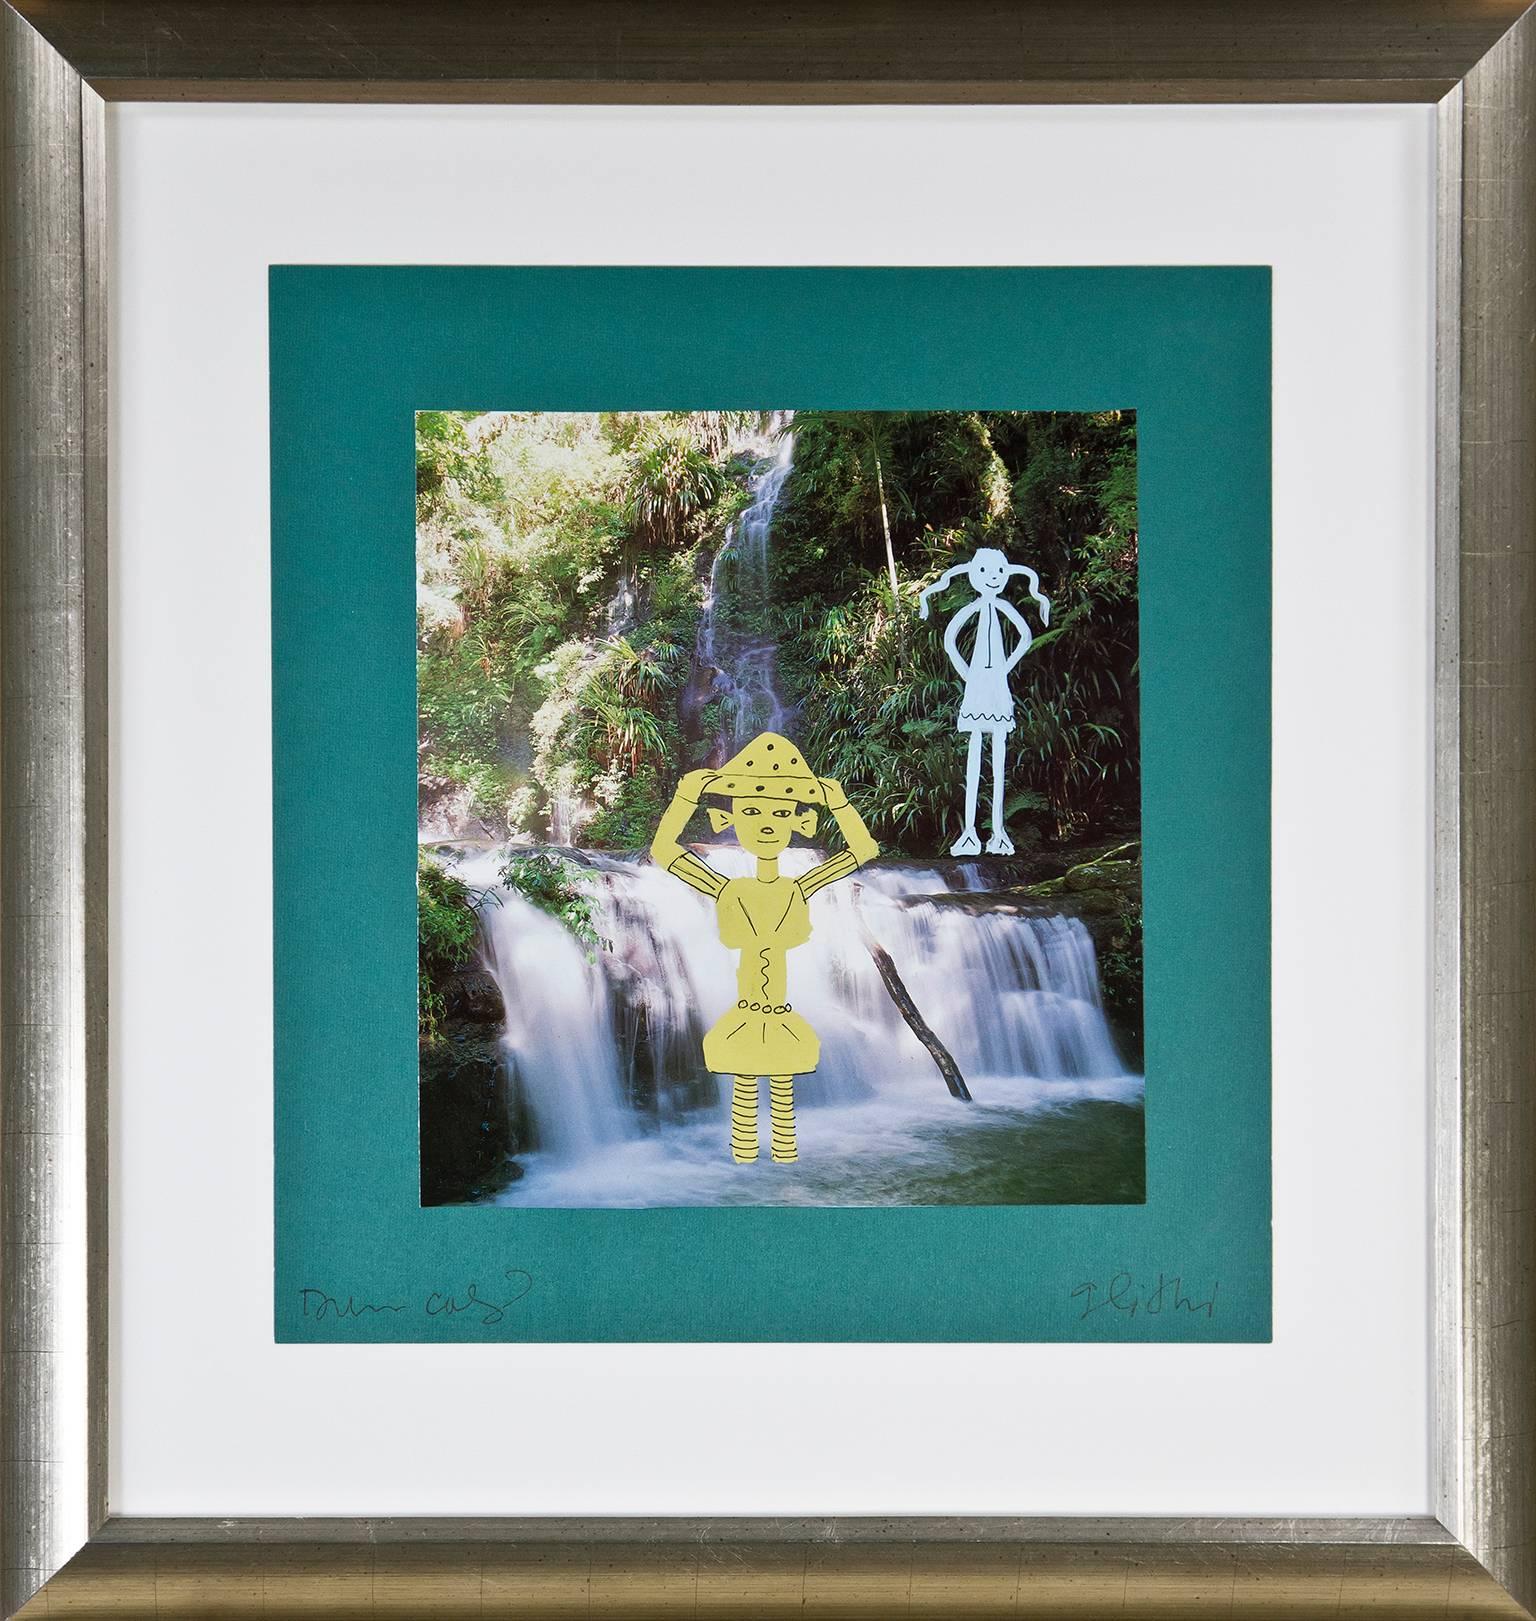 "Posing at Scooter Falls" is an original mixed media piece on paper signed lower right and on verso by artist Scooter Glithorthian. It depicts a yellow knight character and a blue thin character standing in a waterfall posing. 

Artwork Size: 8 3/4"